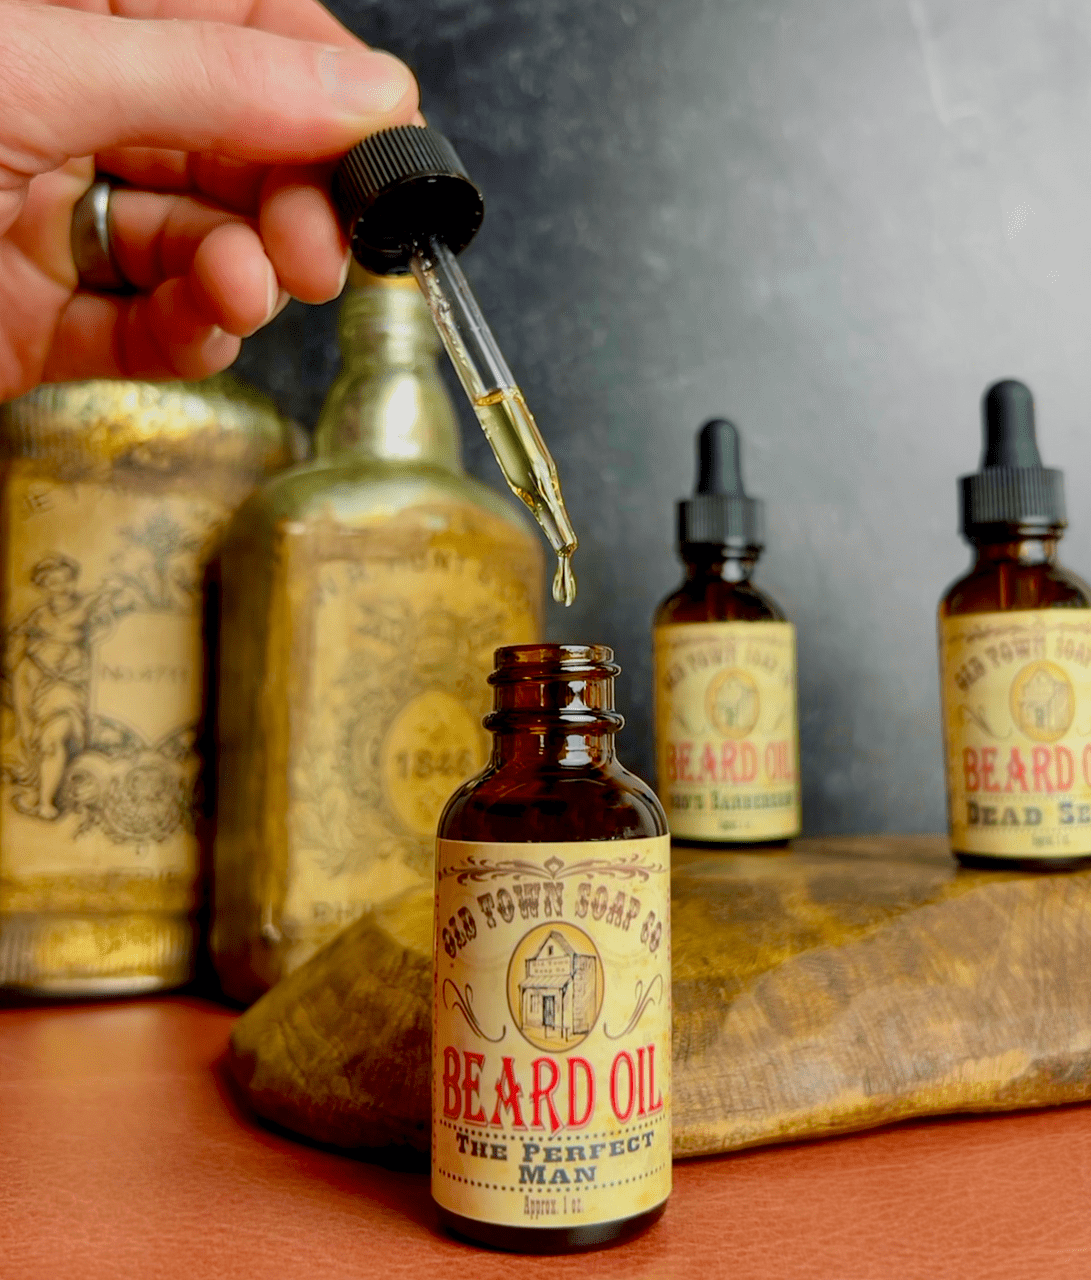 The Viking -Beard Oil - Old Town Soap Co.